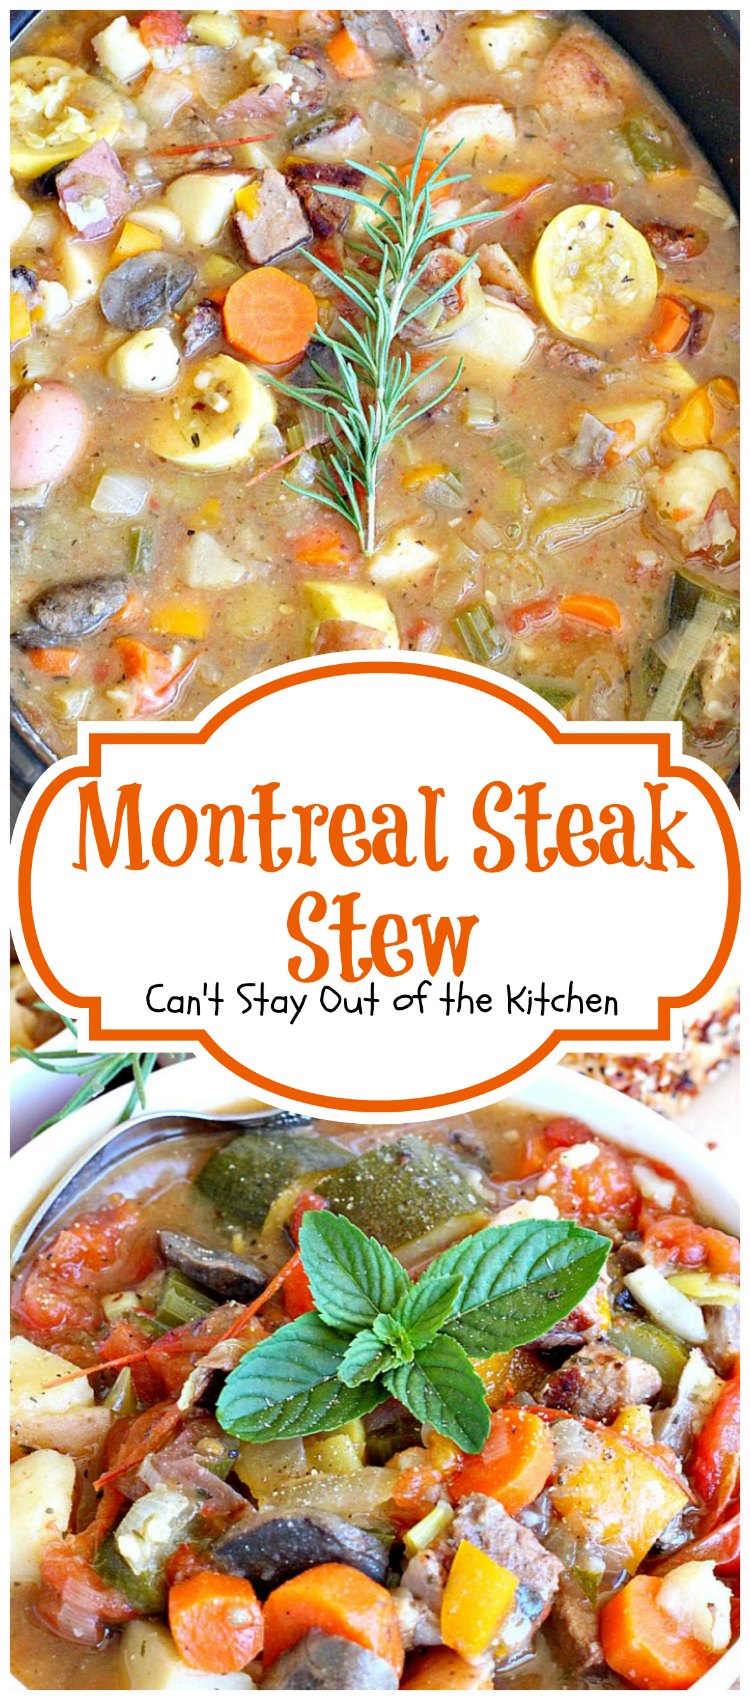 Montreal Steak Stew | Can't Stay Out of the Kitchen